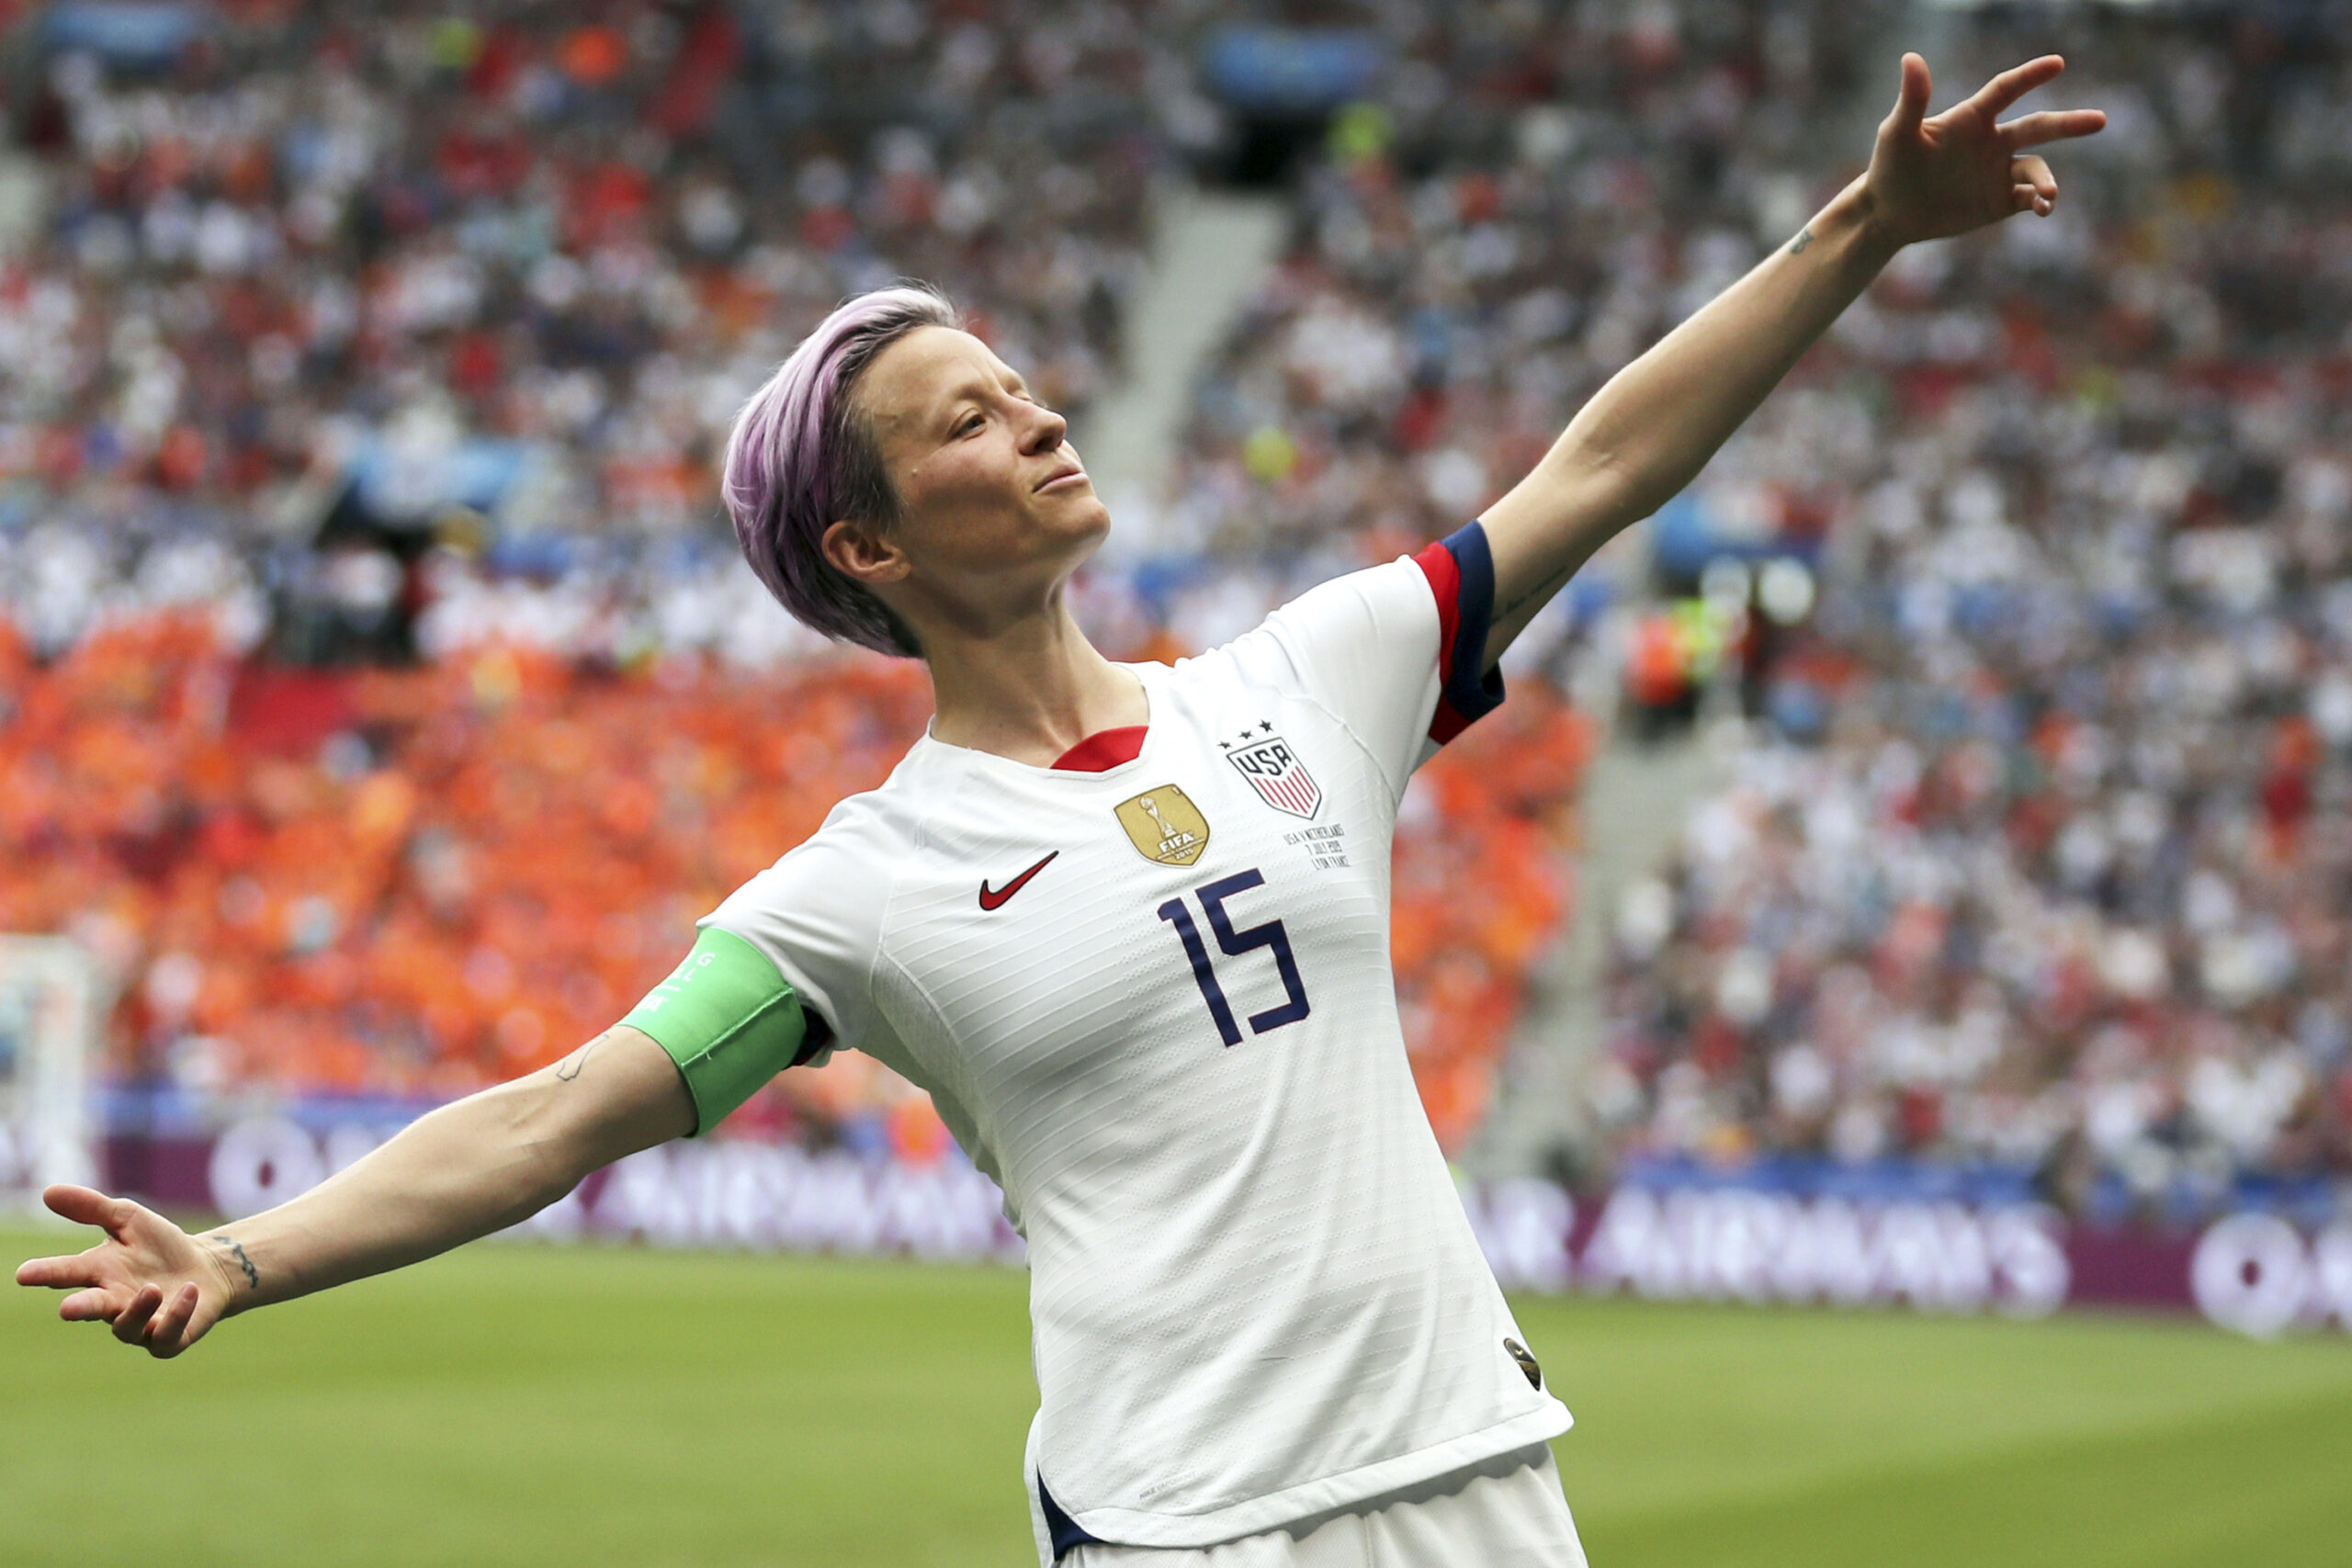 World Cup Champion Megan Rapinoe Announces Retirement From Women’s Soccer: ‘I Feel Incredibly Grateful’